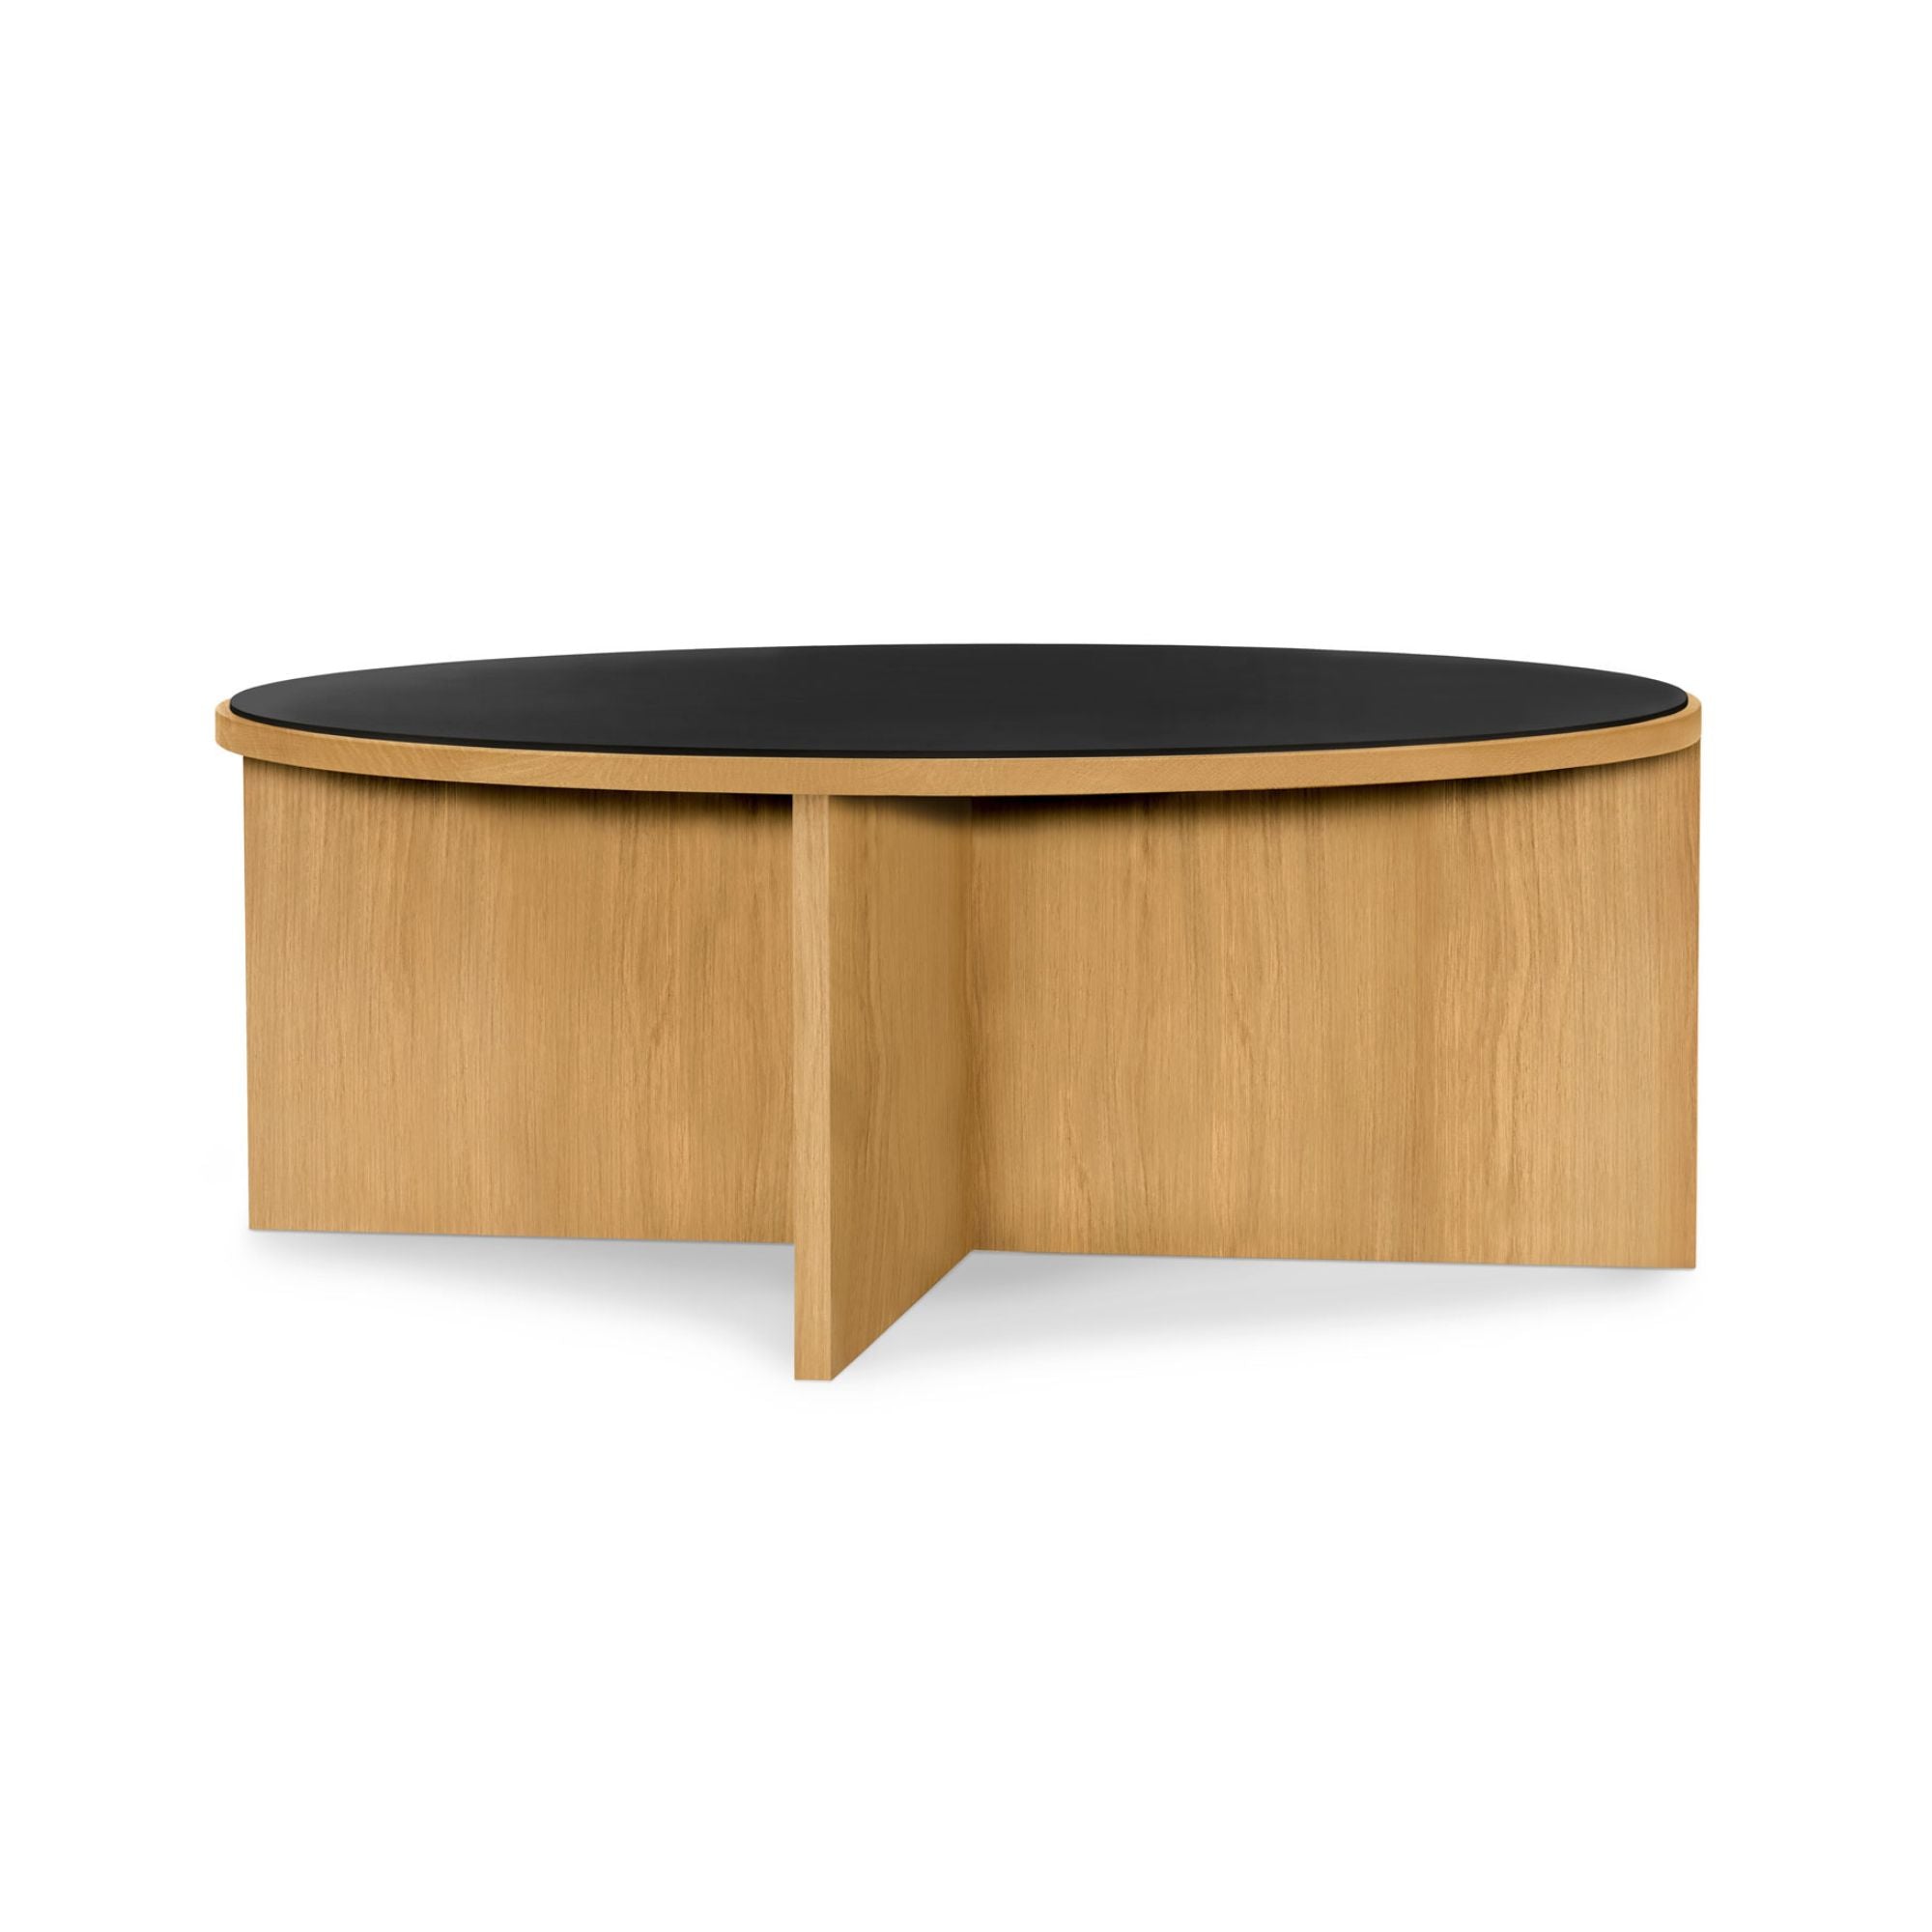 Cici L Dining Table Dining Table Ann Demeulemeester